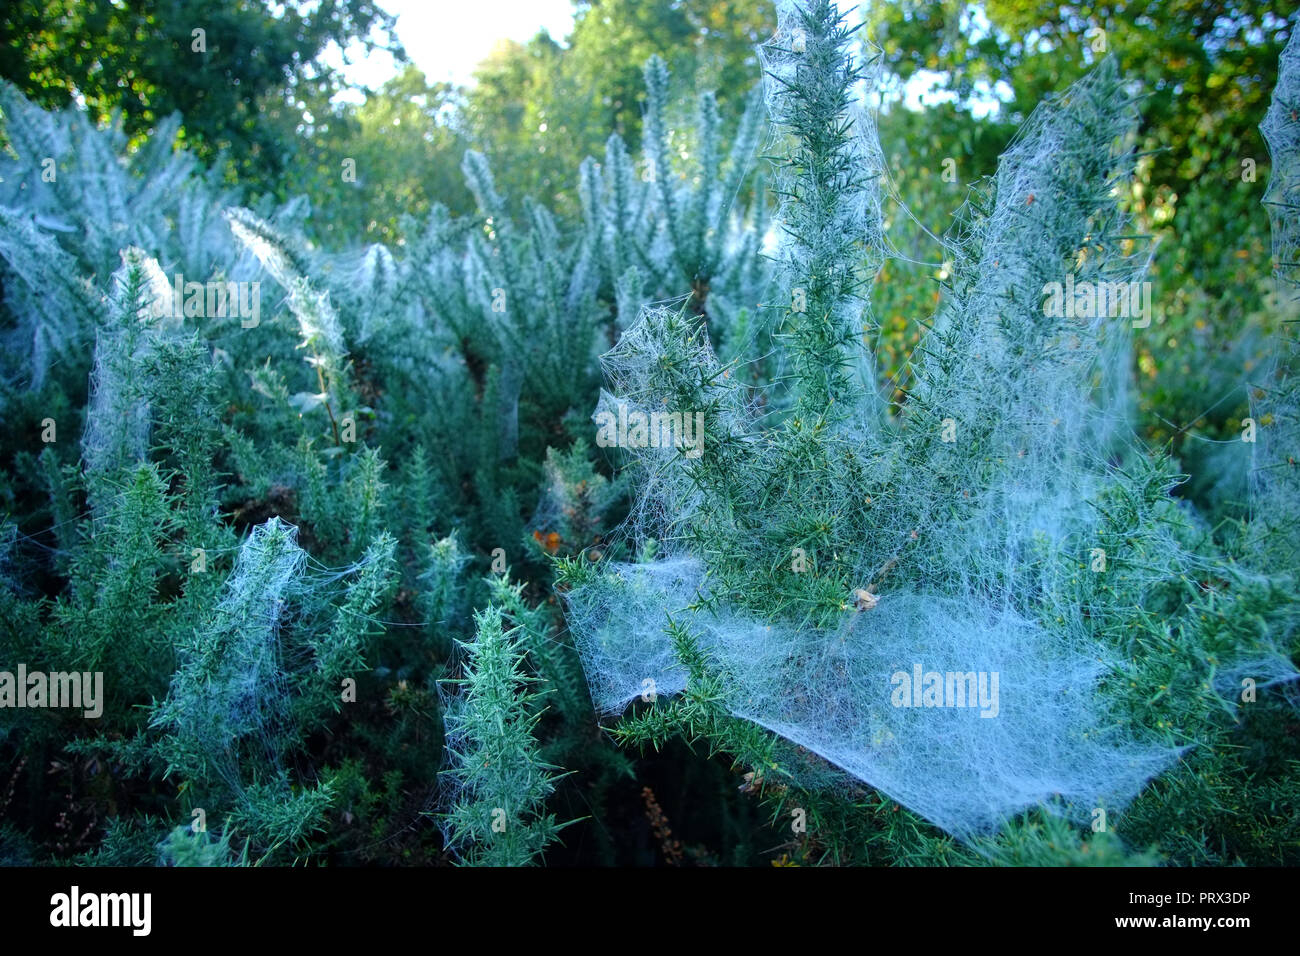 Chailey Common nature reserve, East Sussex. UK. 5th October 2018. Blankets of cobwebs cover gorse bushes in Chailey Common, UK. The webs are created by vast colonies of tiny gorse spider mites . ©Peter Cripps/Alamy Live News Stock Photo